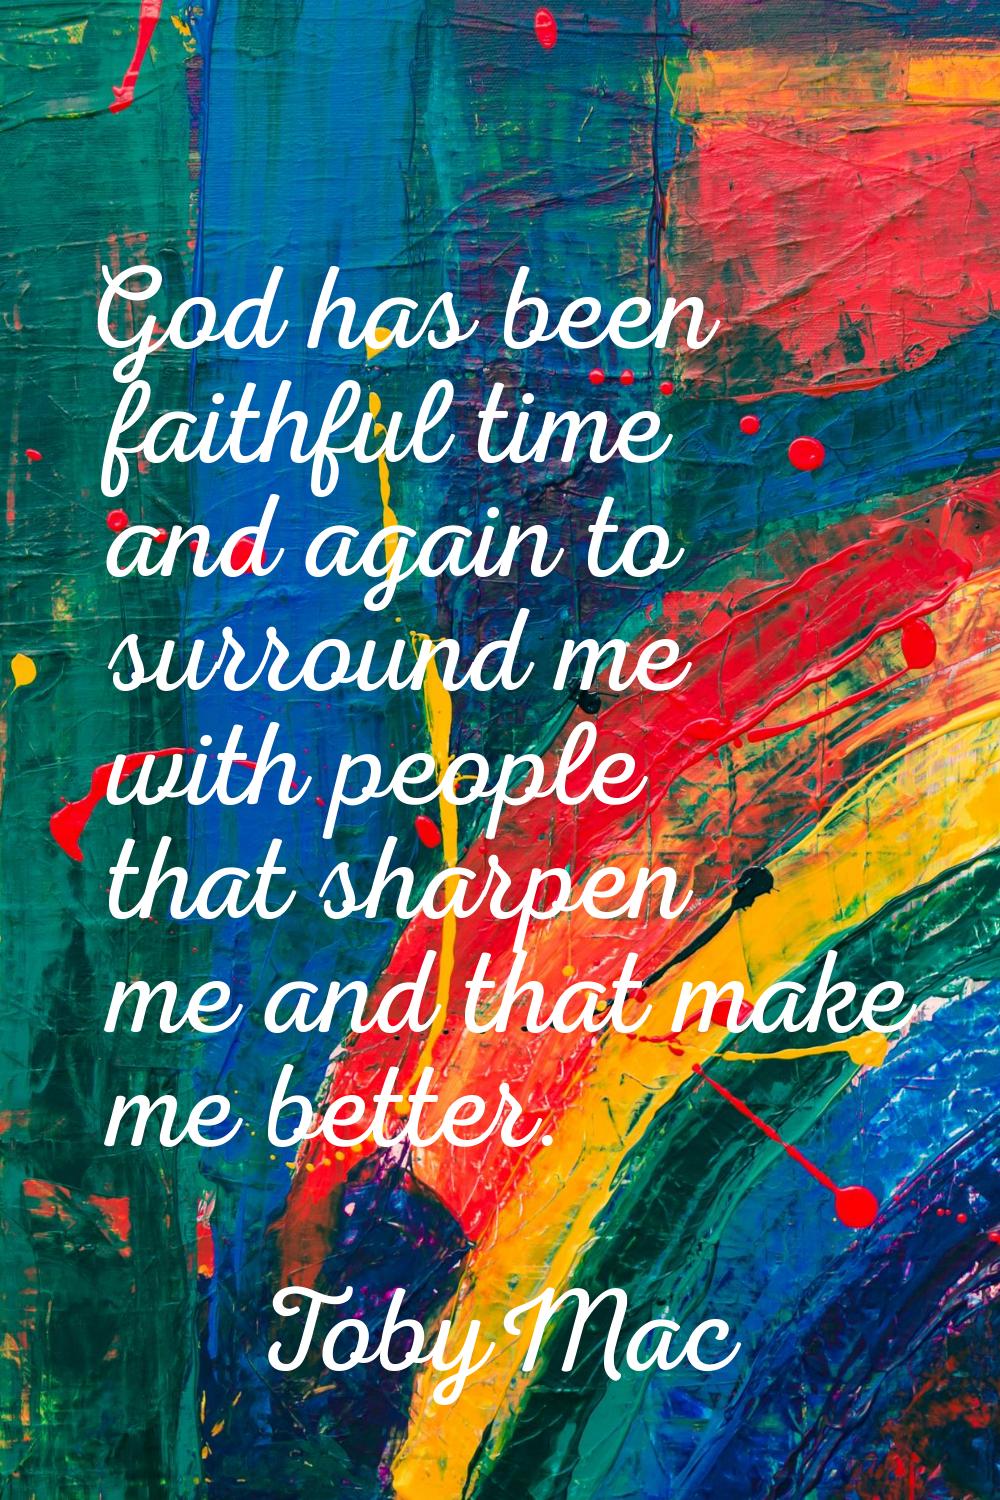 God has been faithful time and again to surround me with people that sharpen me and that make me be